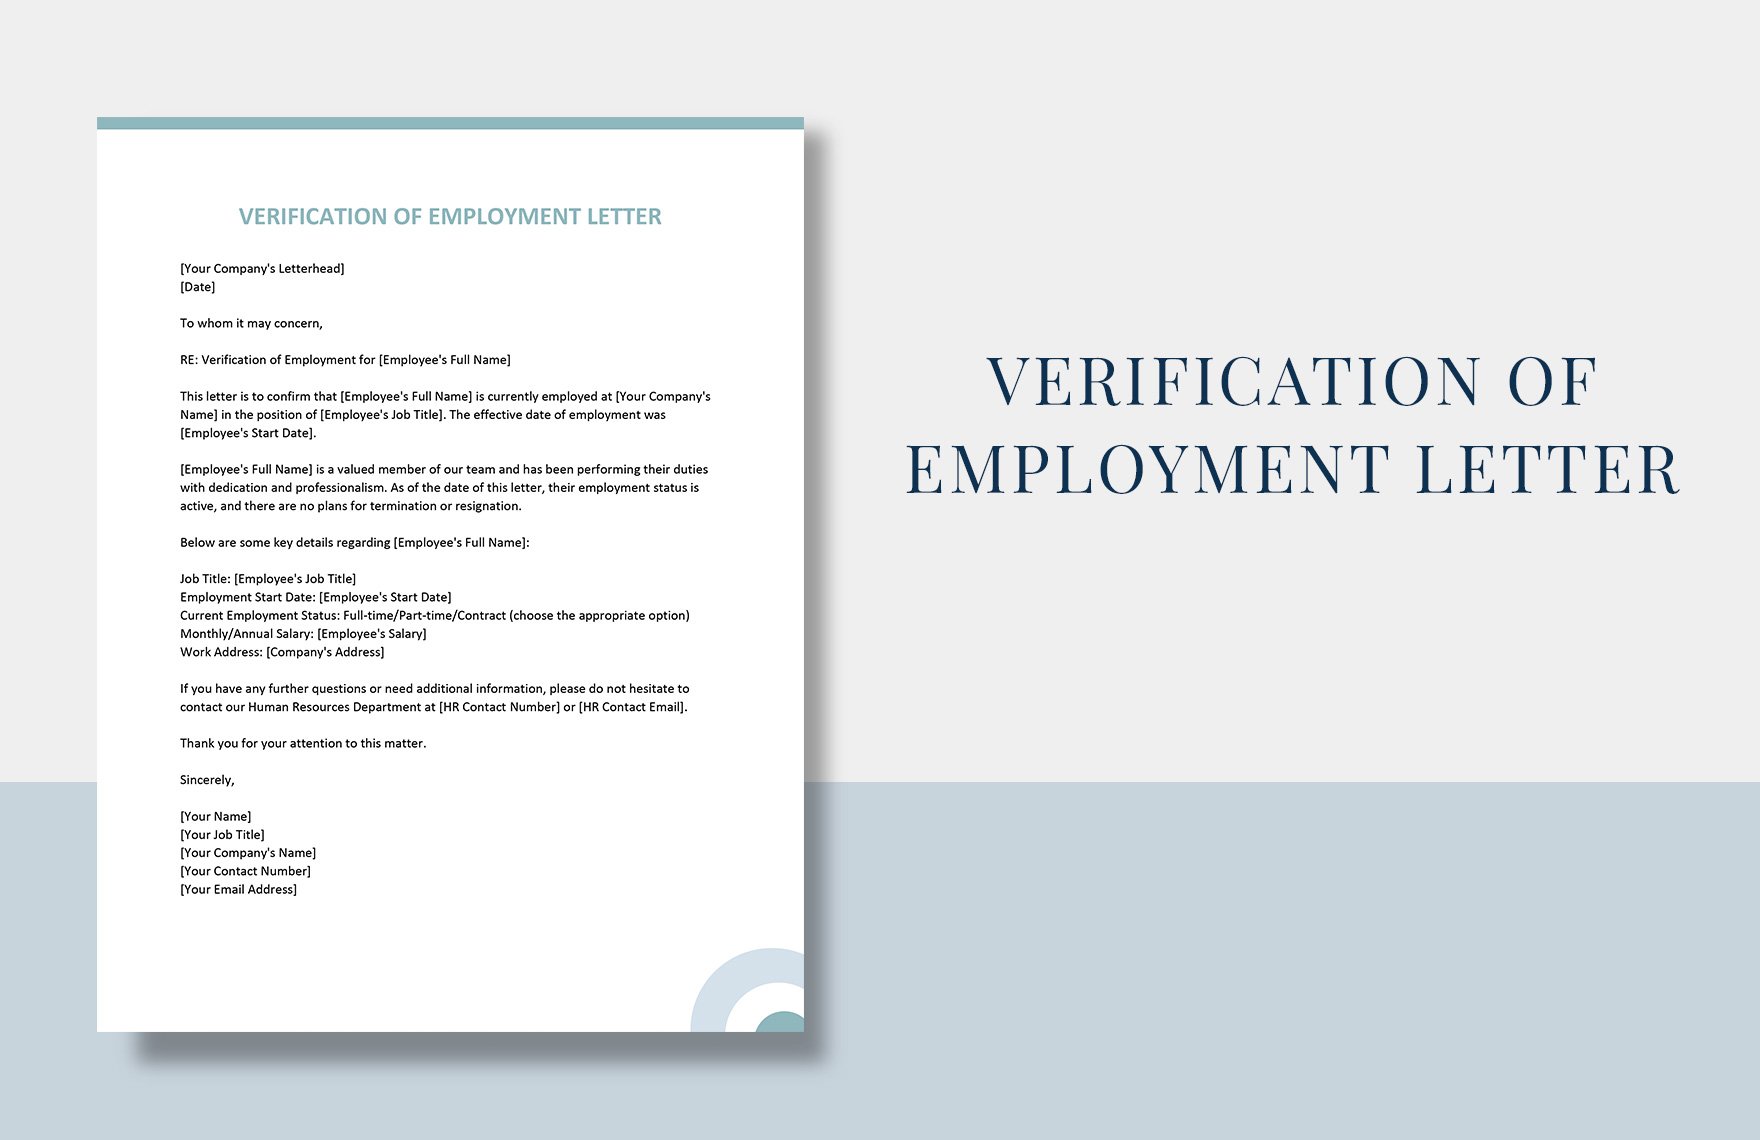 Free Verification of Employment Letter